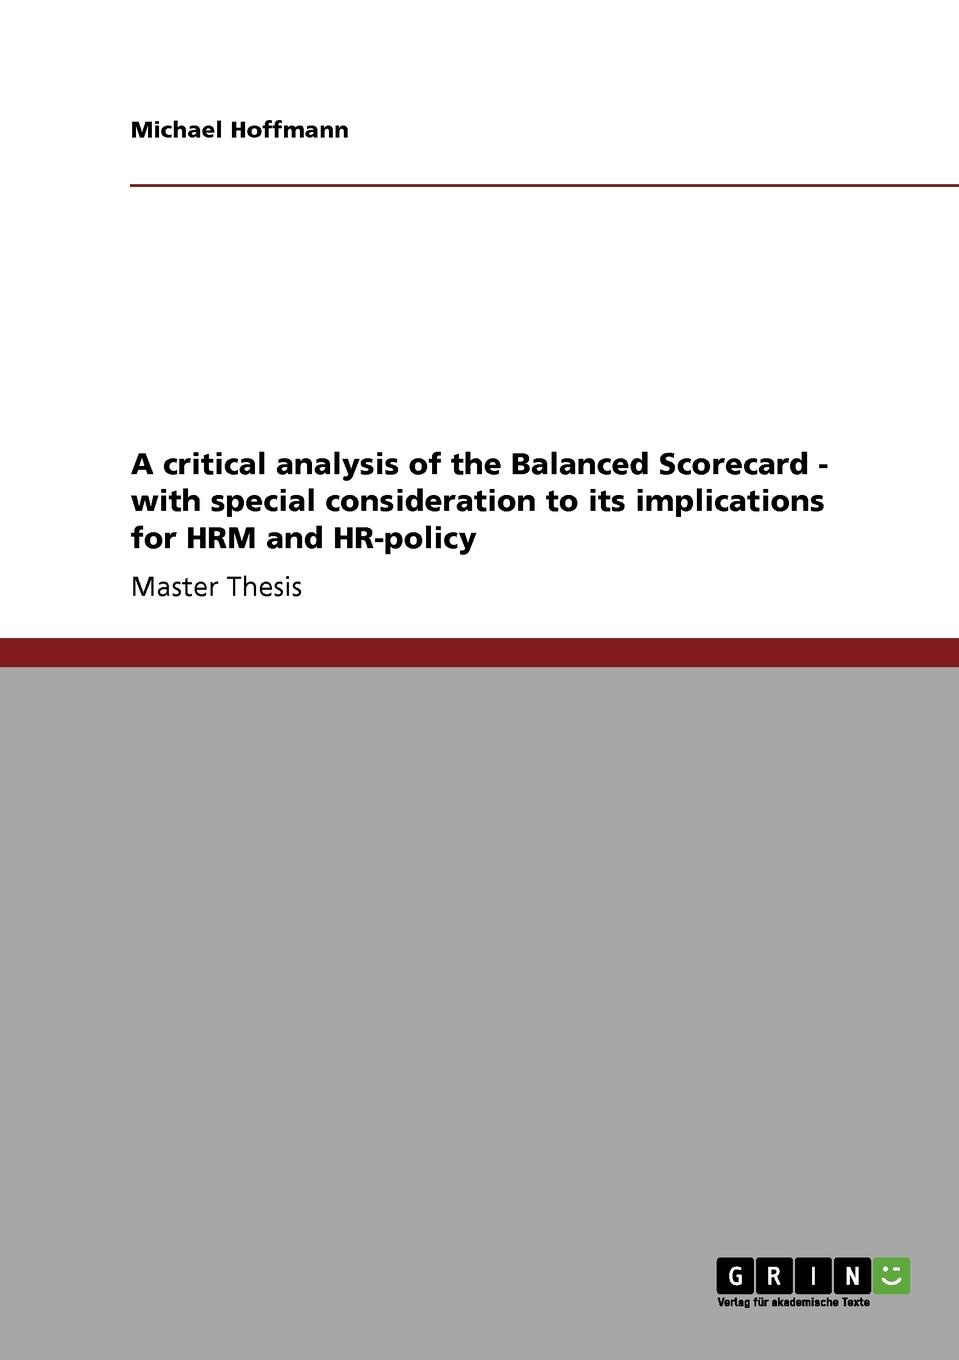 фото A critical analysis of the Balanced Scorecard - with special consideration to its implications for HRM and HR-policy